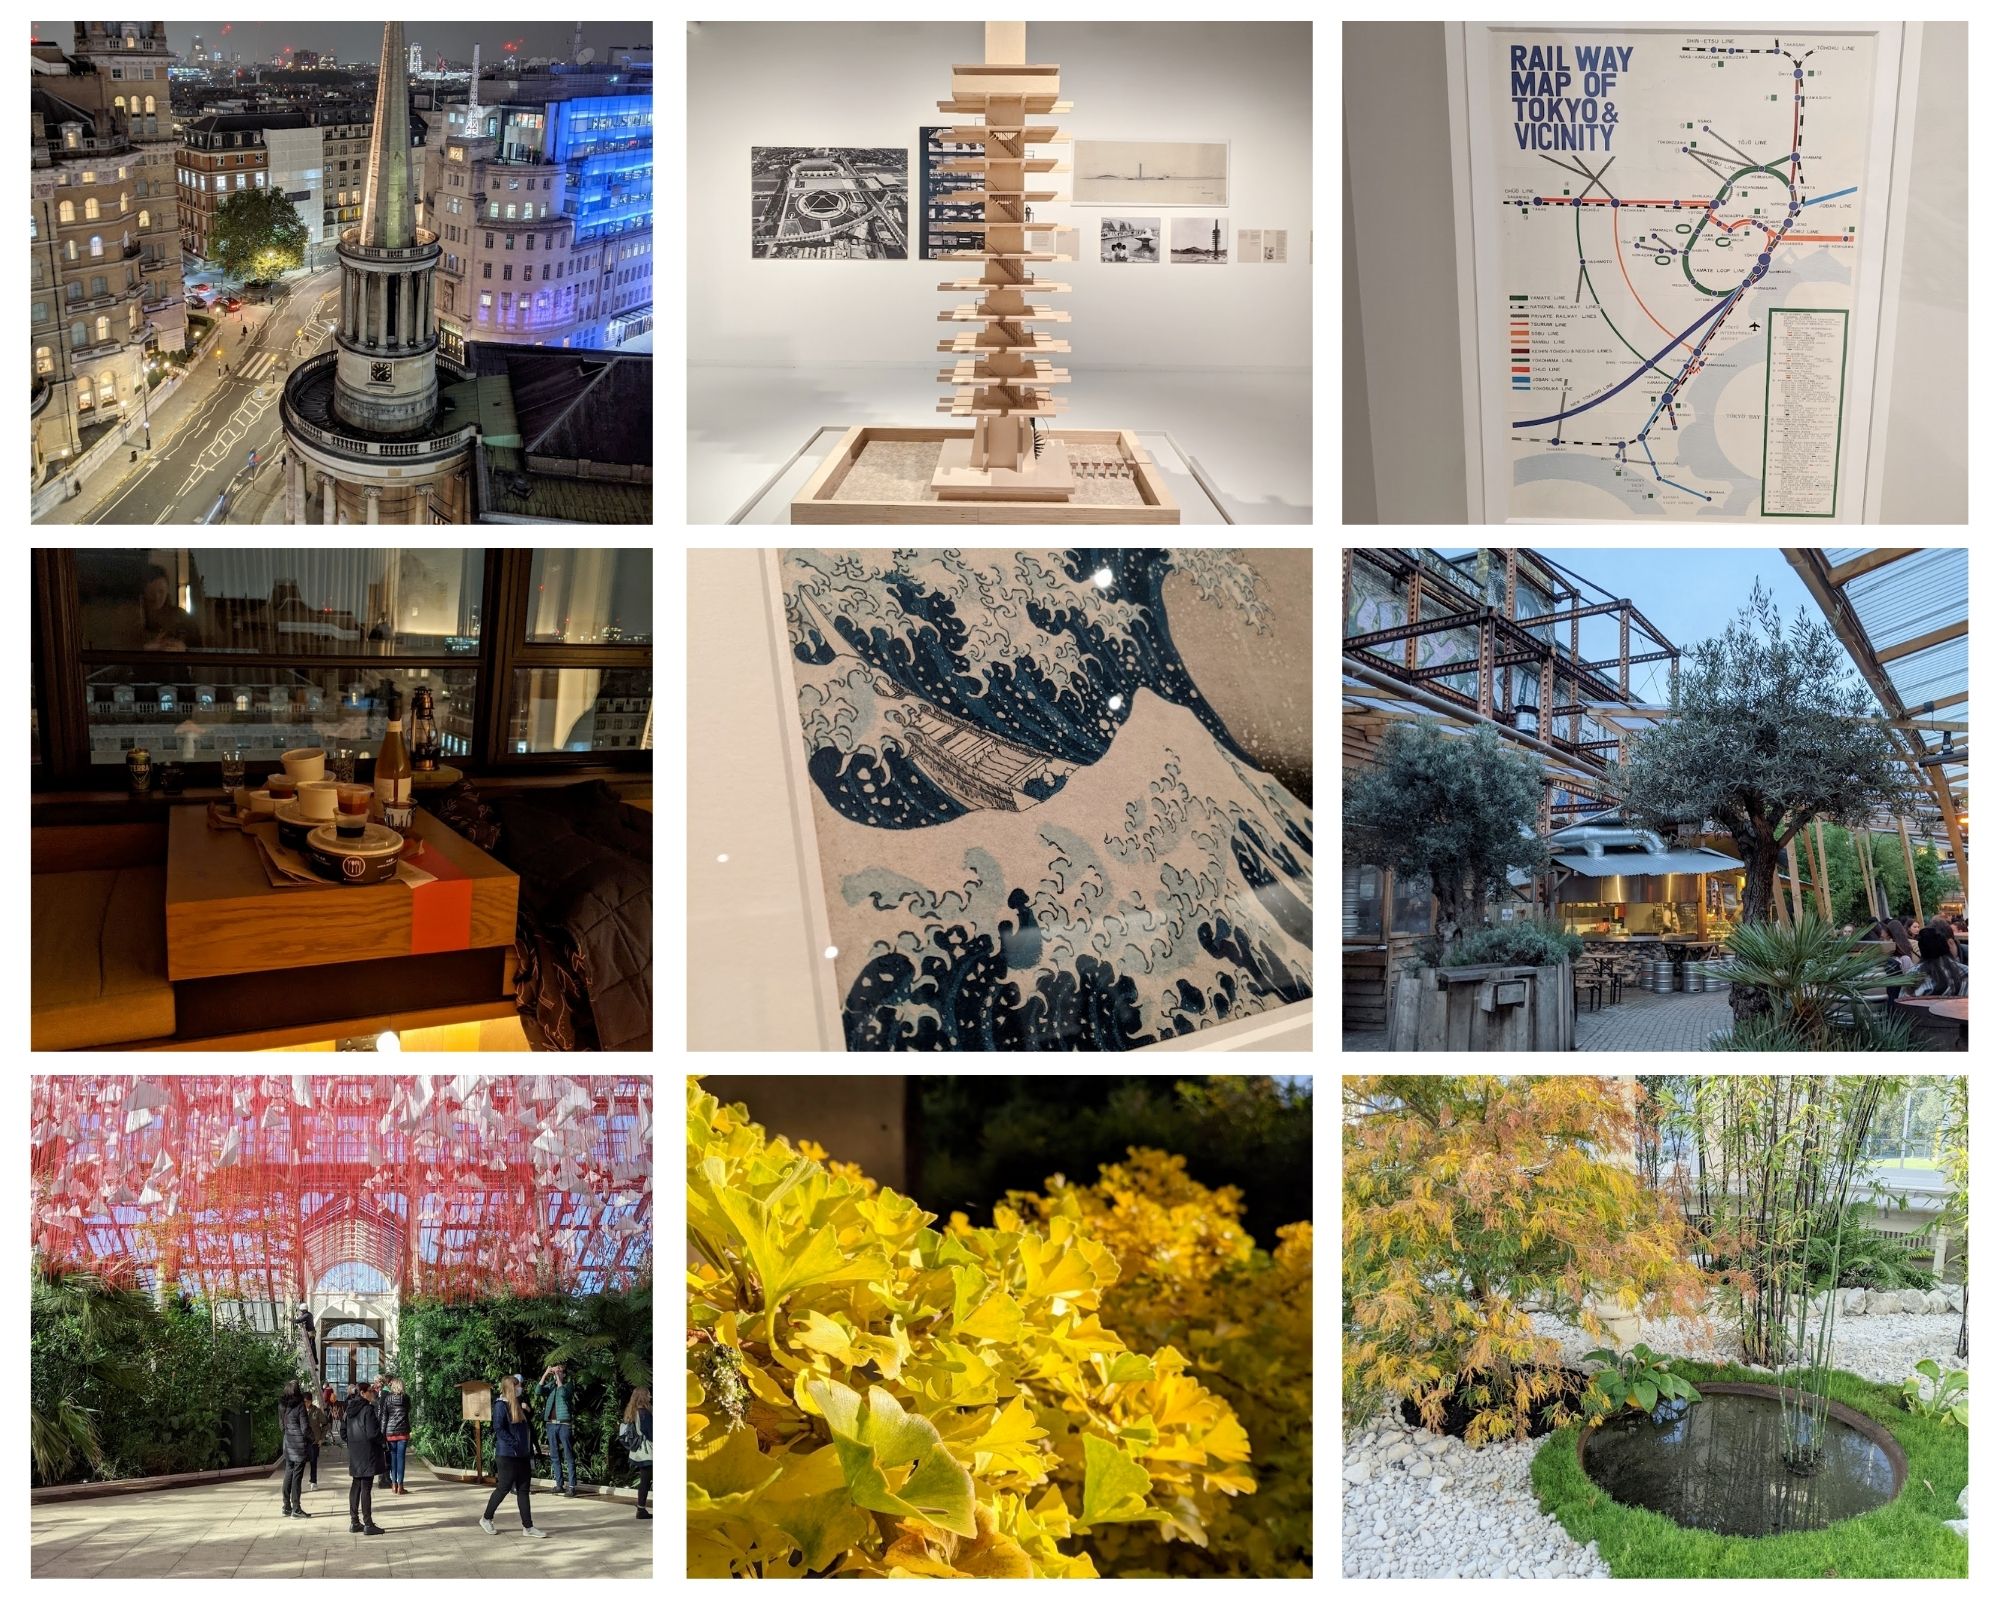 A set of photos, this time showing shots of a Japanese Olympics exhibition, Hokusai, Kew Gardens, and more